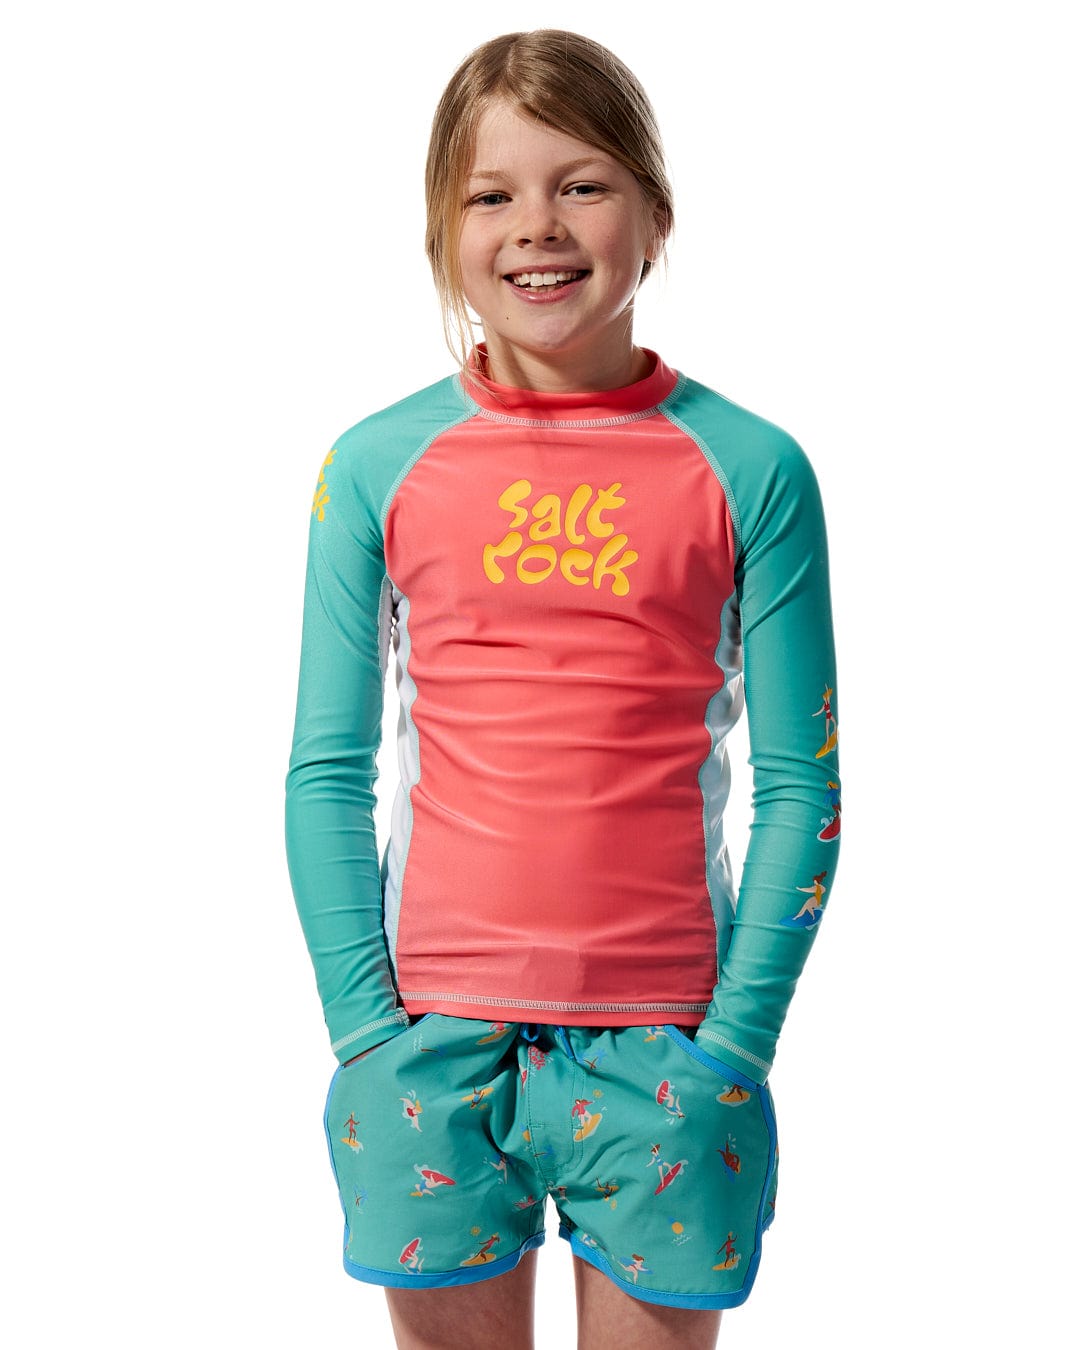 A young girl wearing a Surf Sister - Kids Long Sleeve Rashvest - Coral/Turquoise by Saltrock and shorts.